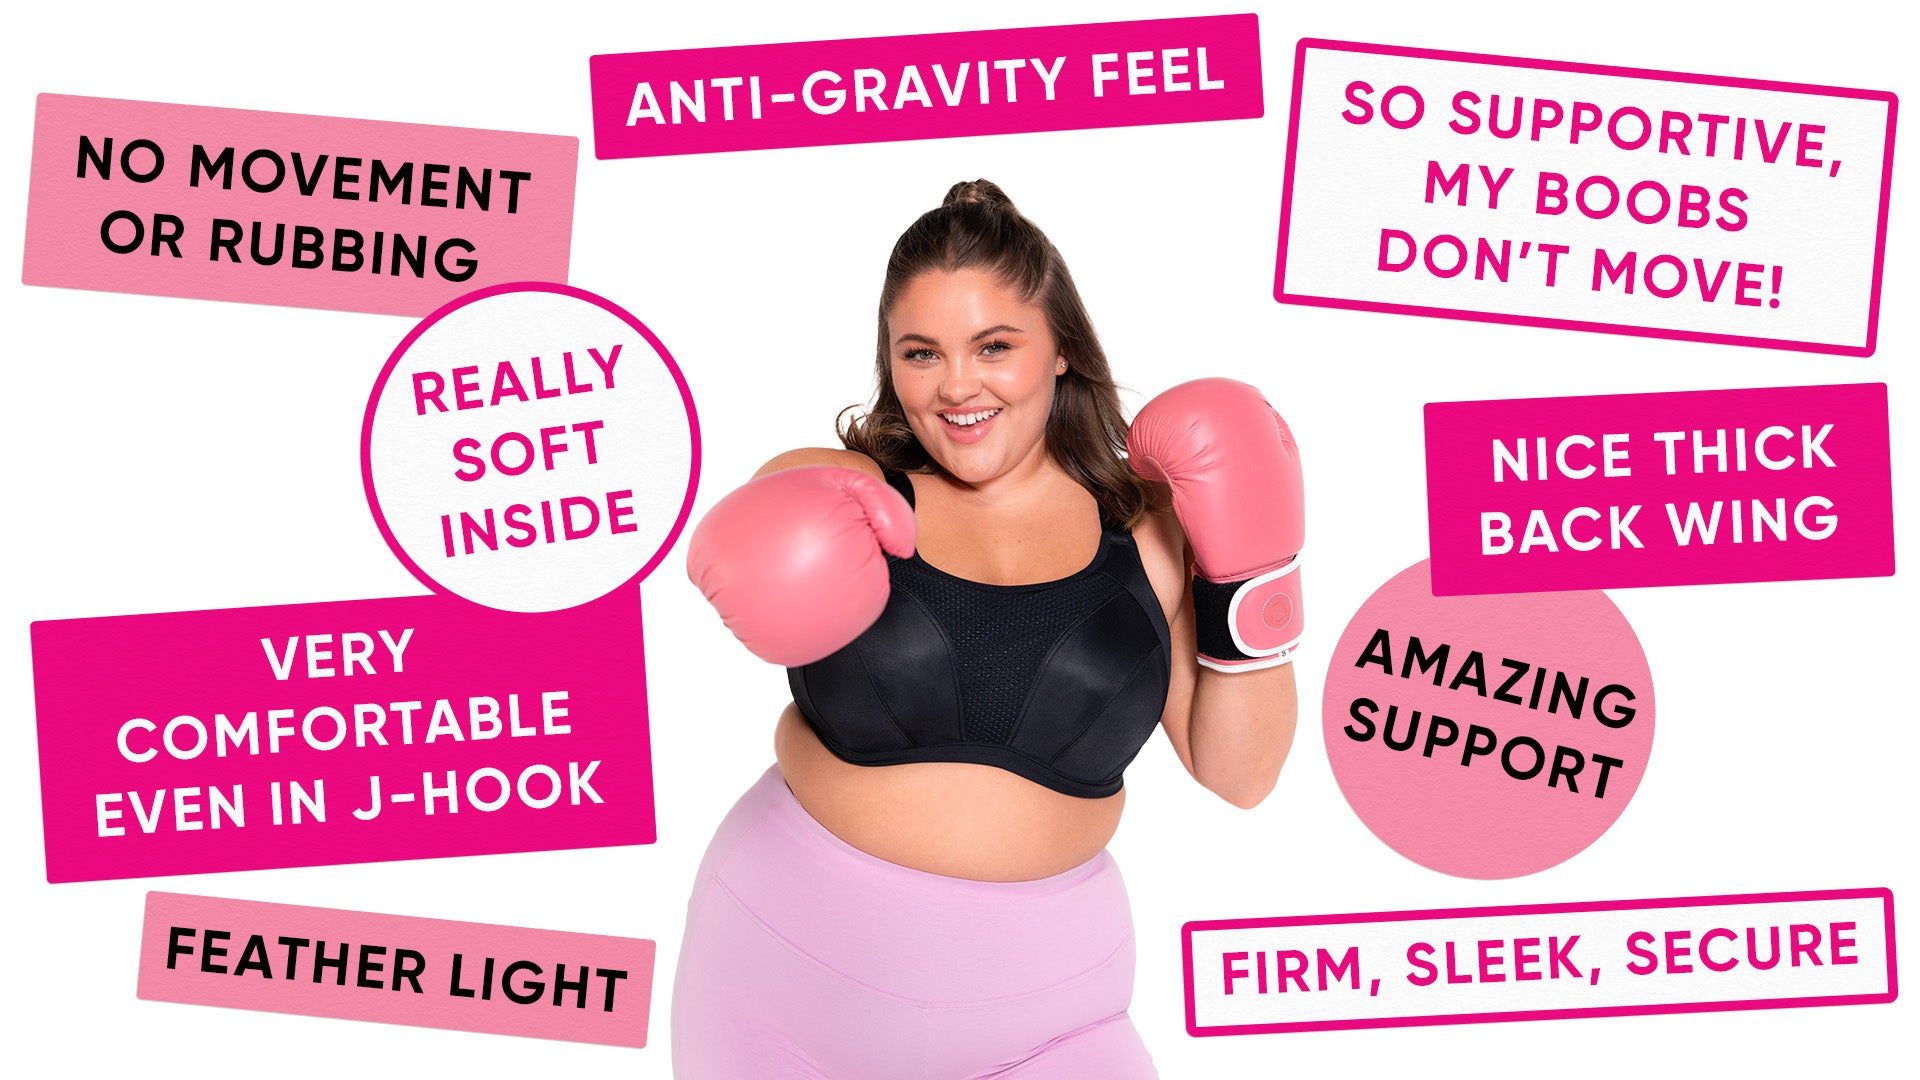 Anti-Gravity Feel / So supportive, my boobs don’t move! / Great Support / Very comfortable even in J-hook / Really soft inside / Nice thick back wing / No movement or rubbing / Feather light / Firm, Sleek, Secure / Amazing Support